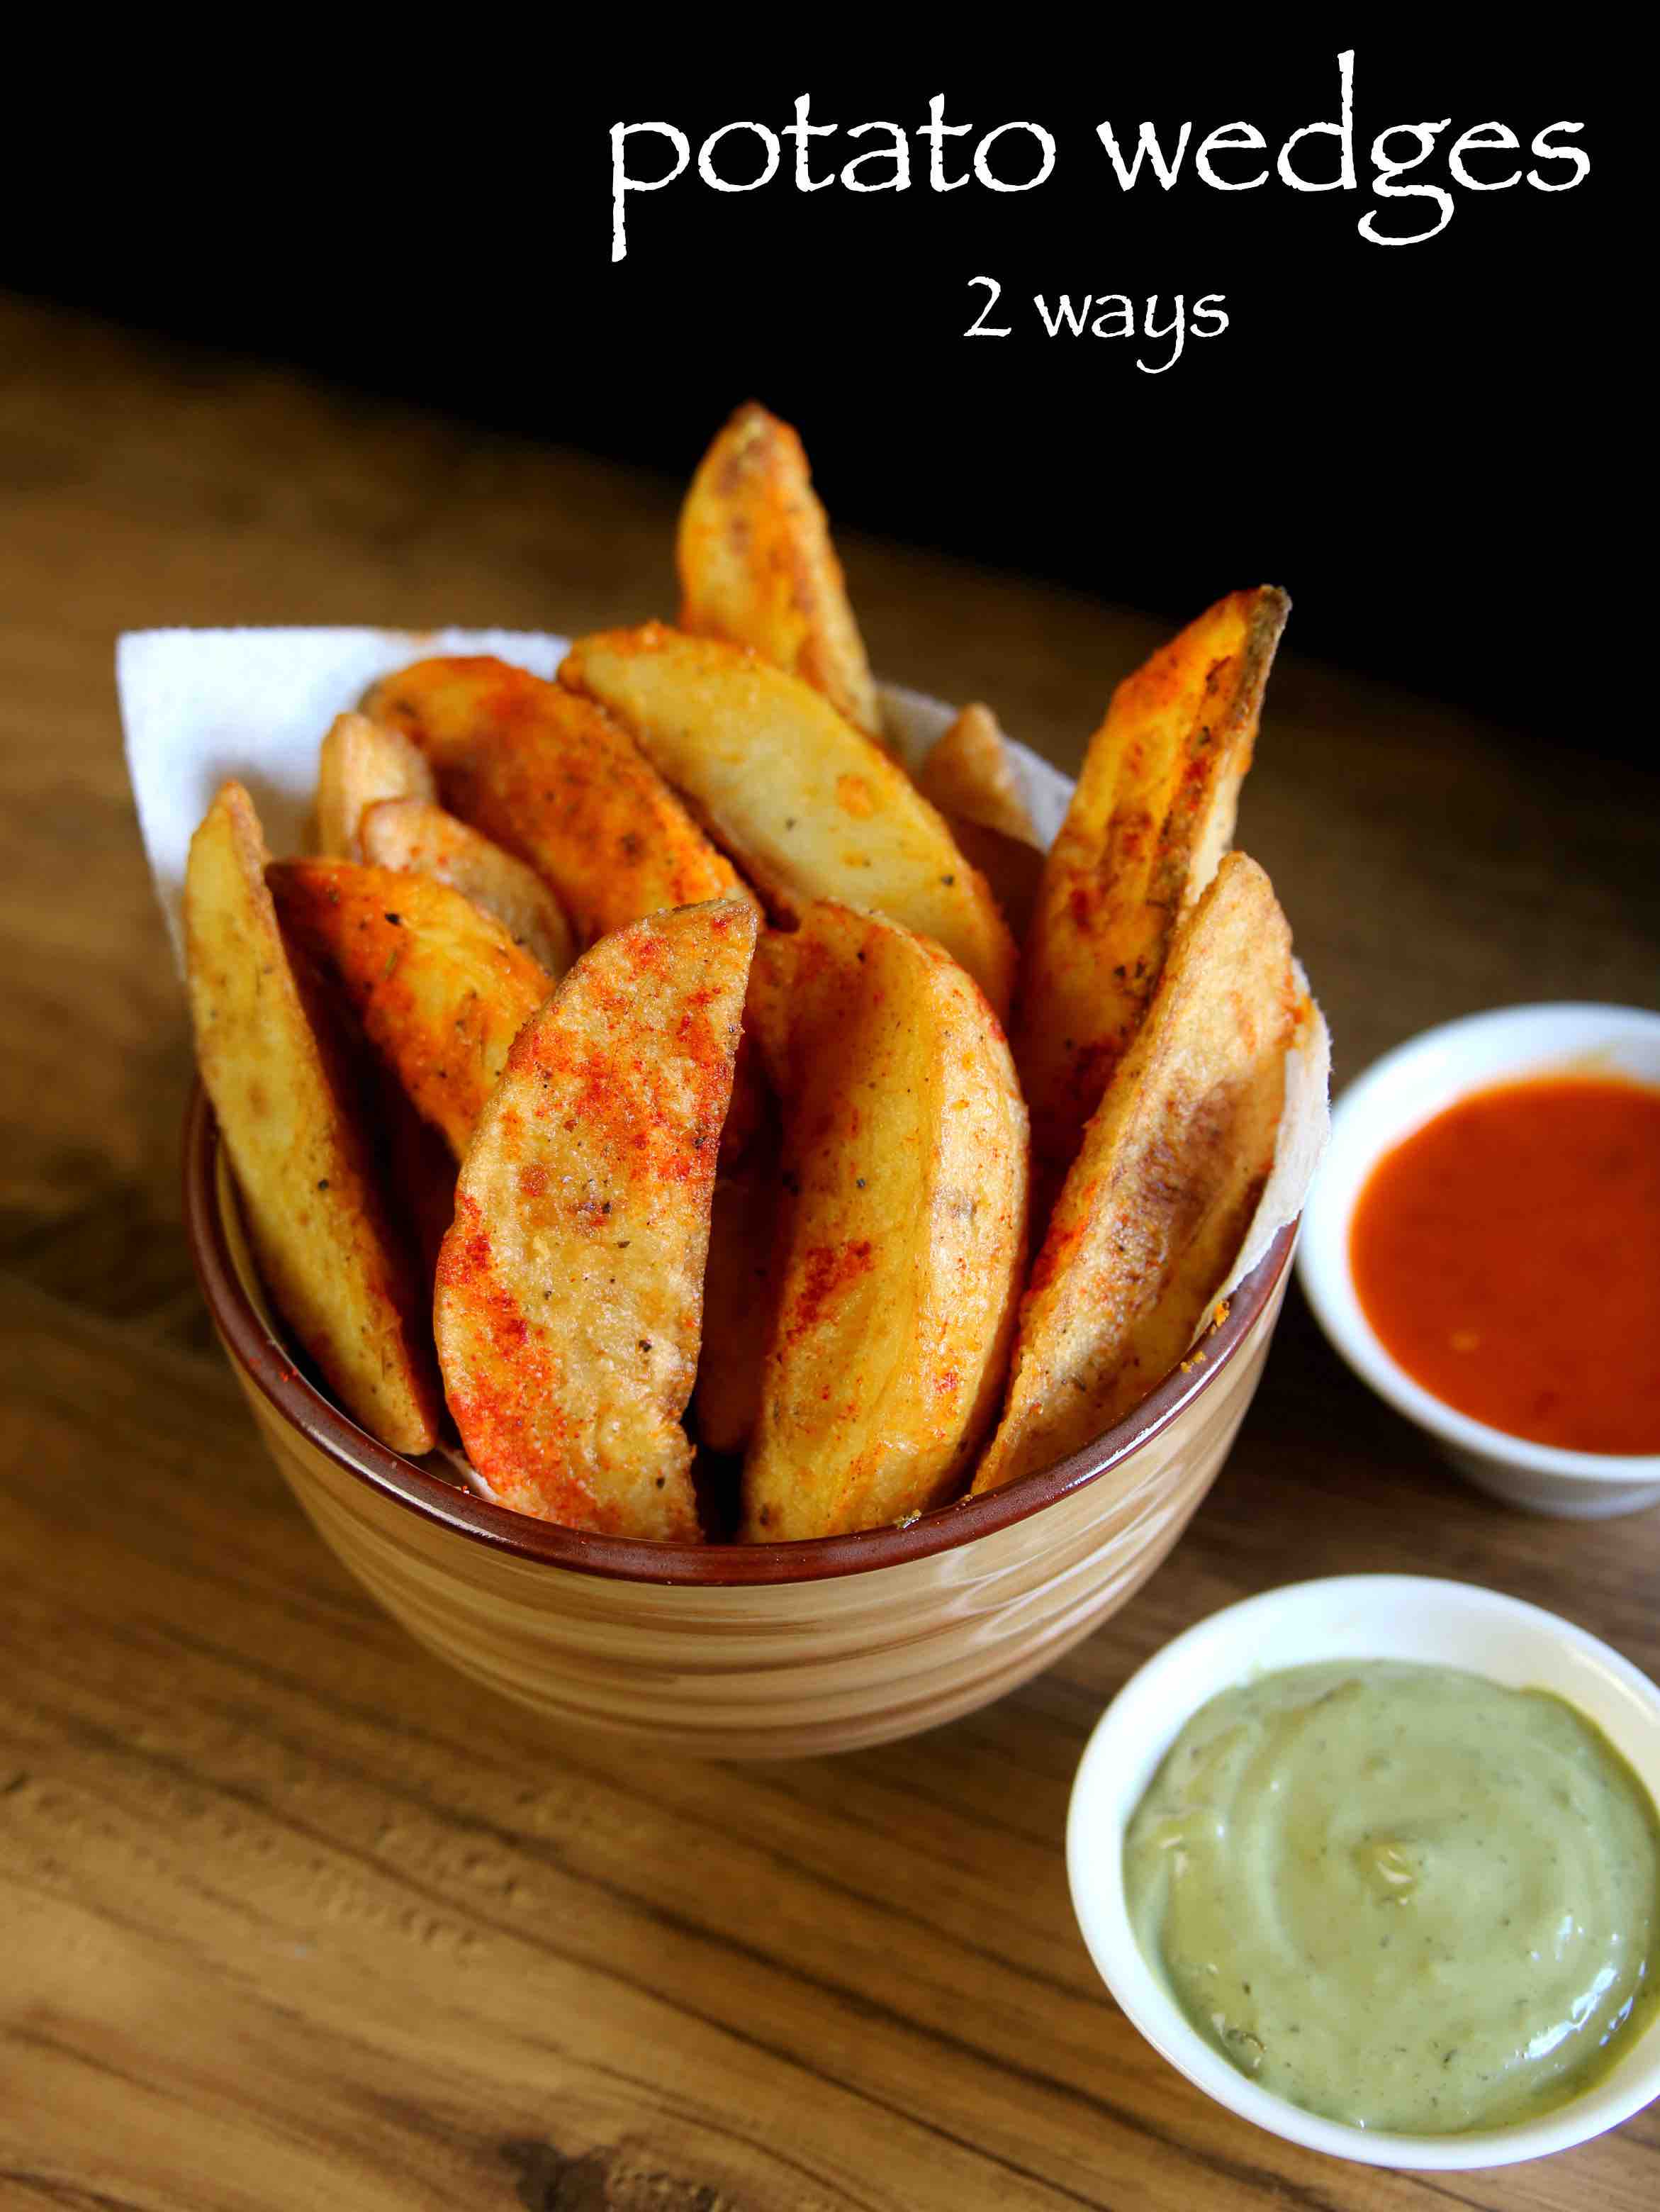 Potato Wedges Recipe Deep Fried Baked Potato Wedges,How To Make A Copyright Symbol In Publisher